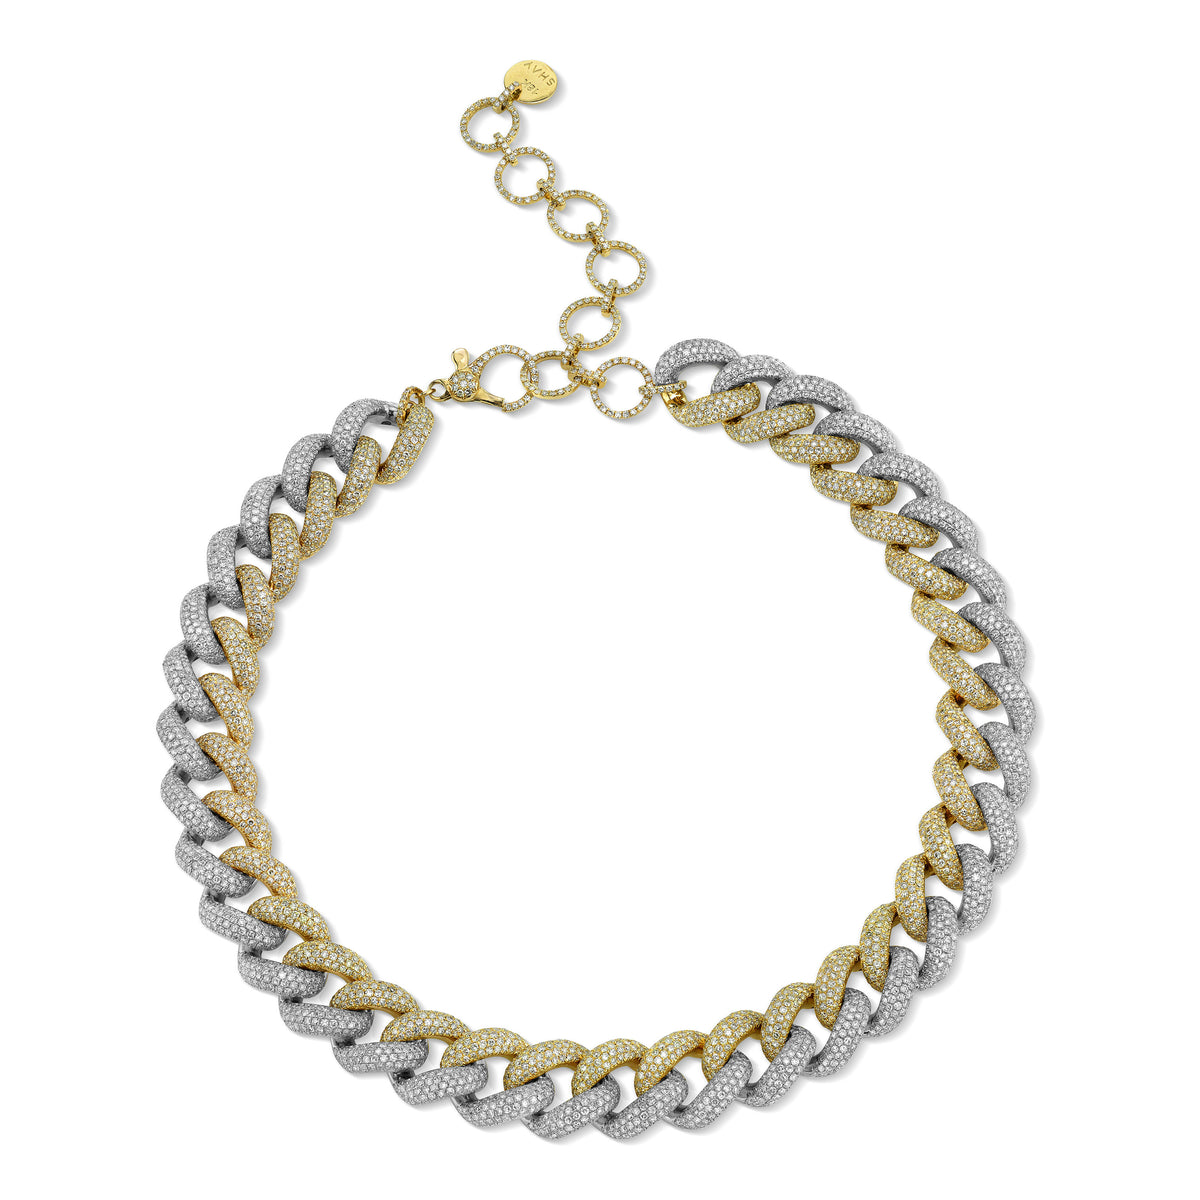 TWO-TONE JUMBO PAVE LINK NECKLACE